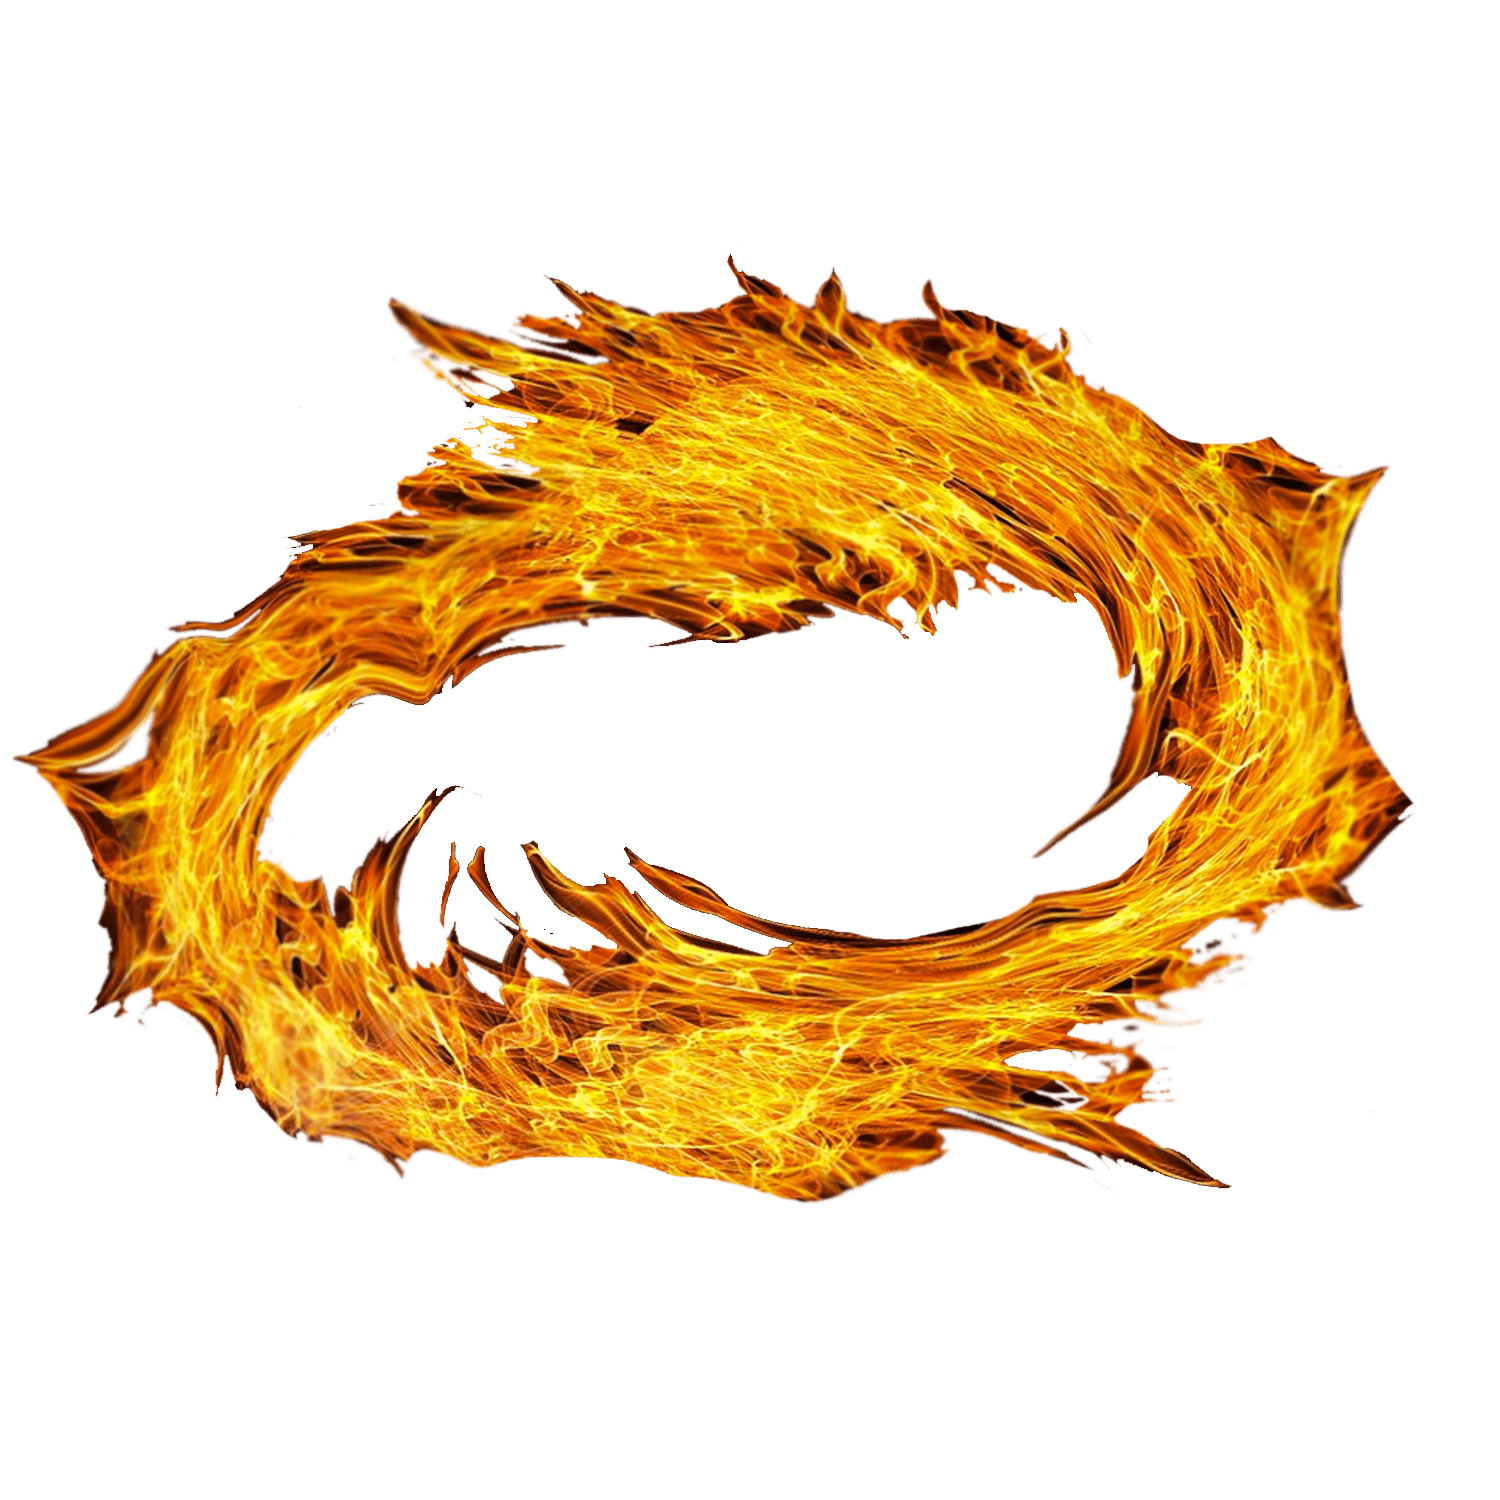 Spiral Of Fire icons